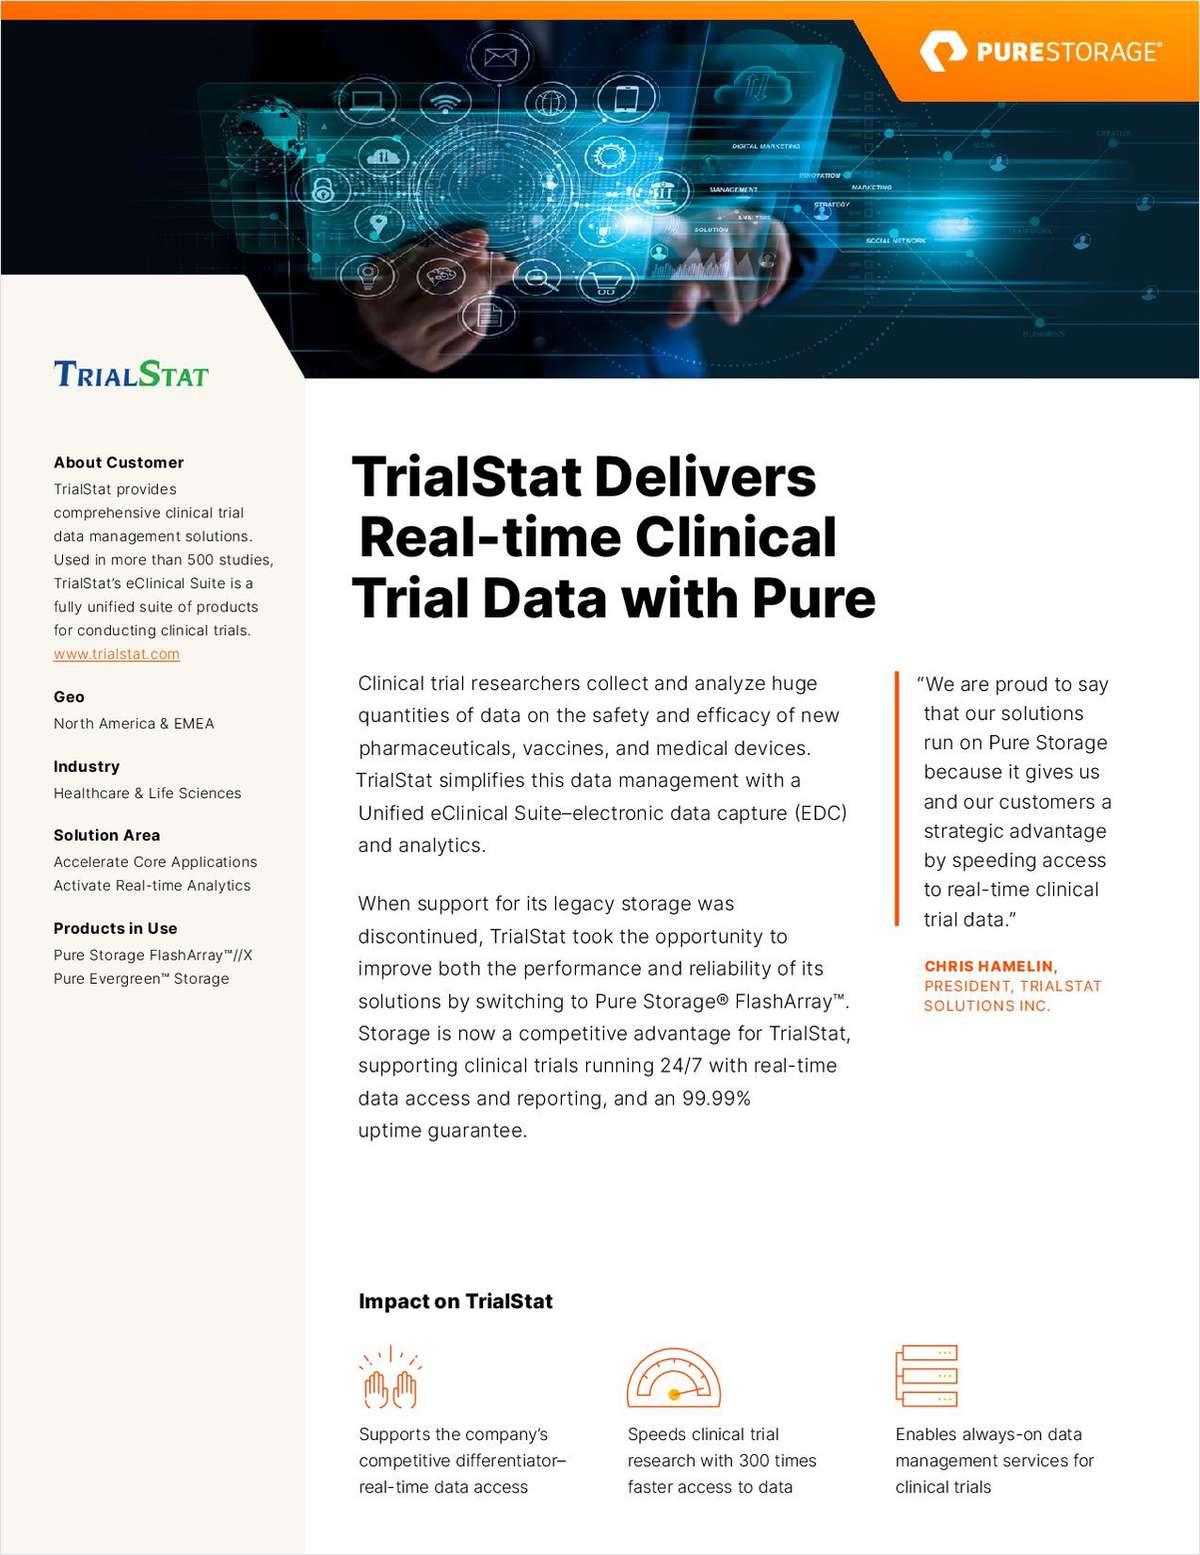 TrialStat Delivers Real-time Clinical Trial Data with Pure